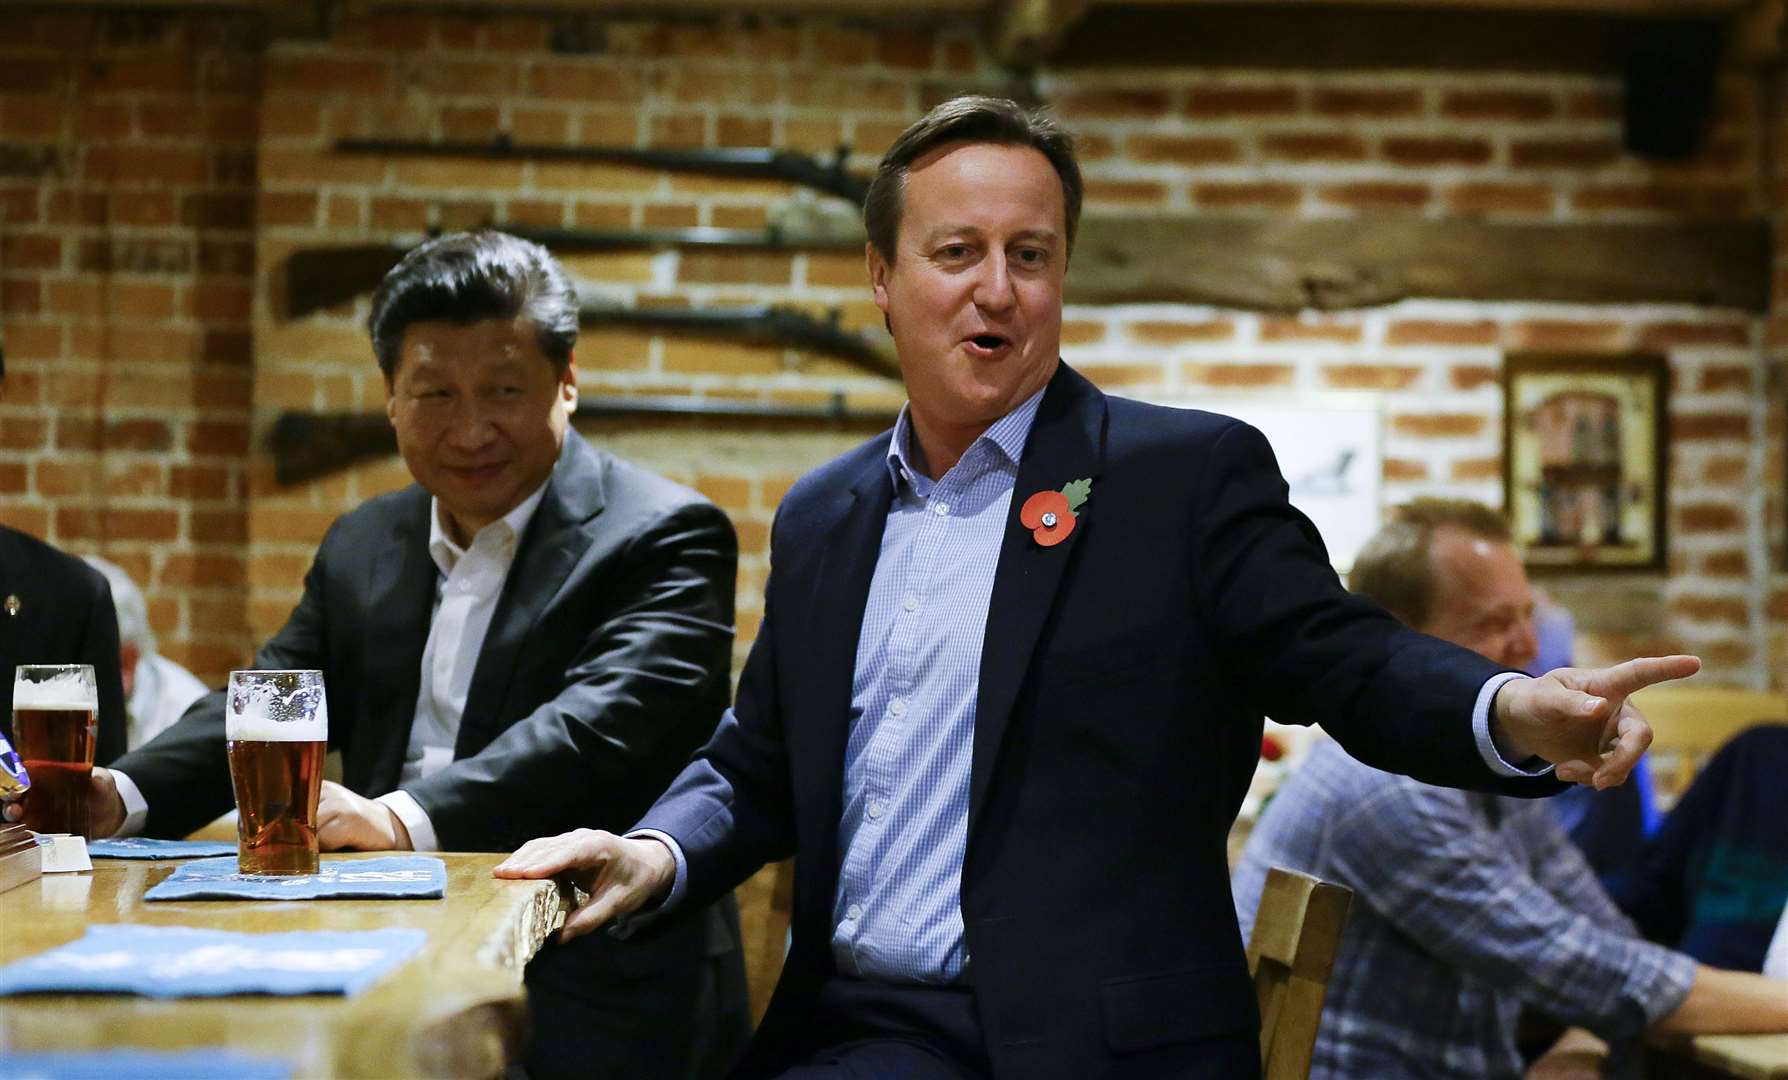 The UK’s relationship with China has changed dramatically since the 2015 pub trip (Kirsty Wigglesworth/PA)